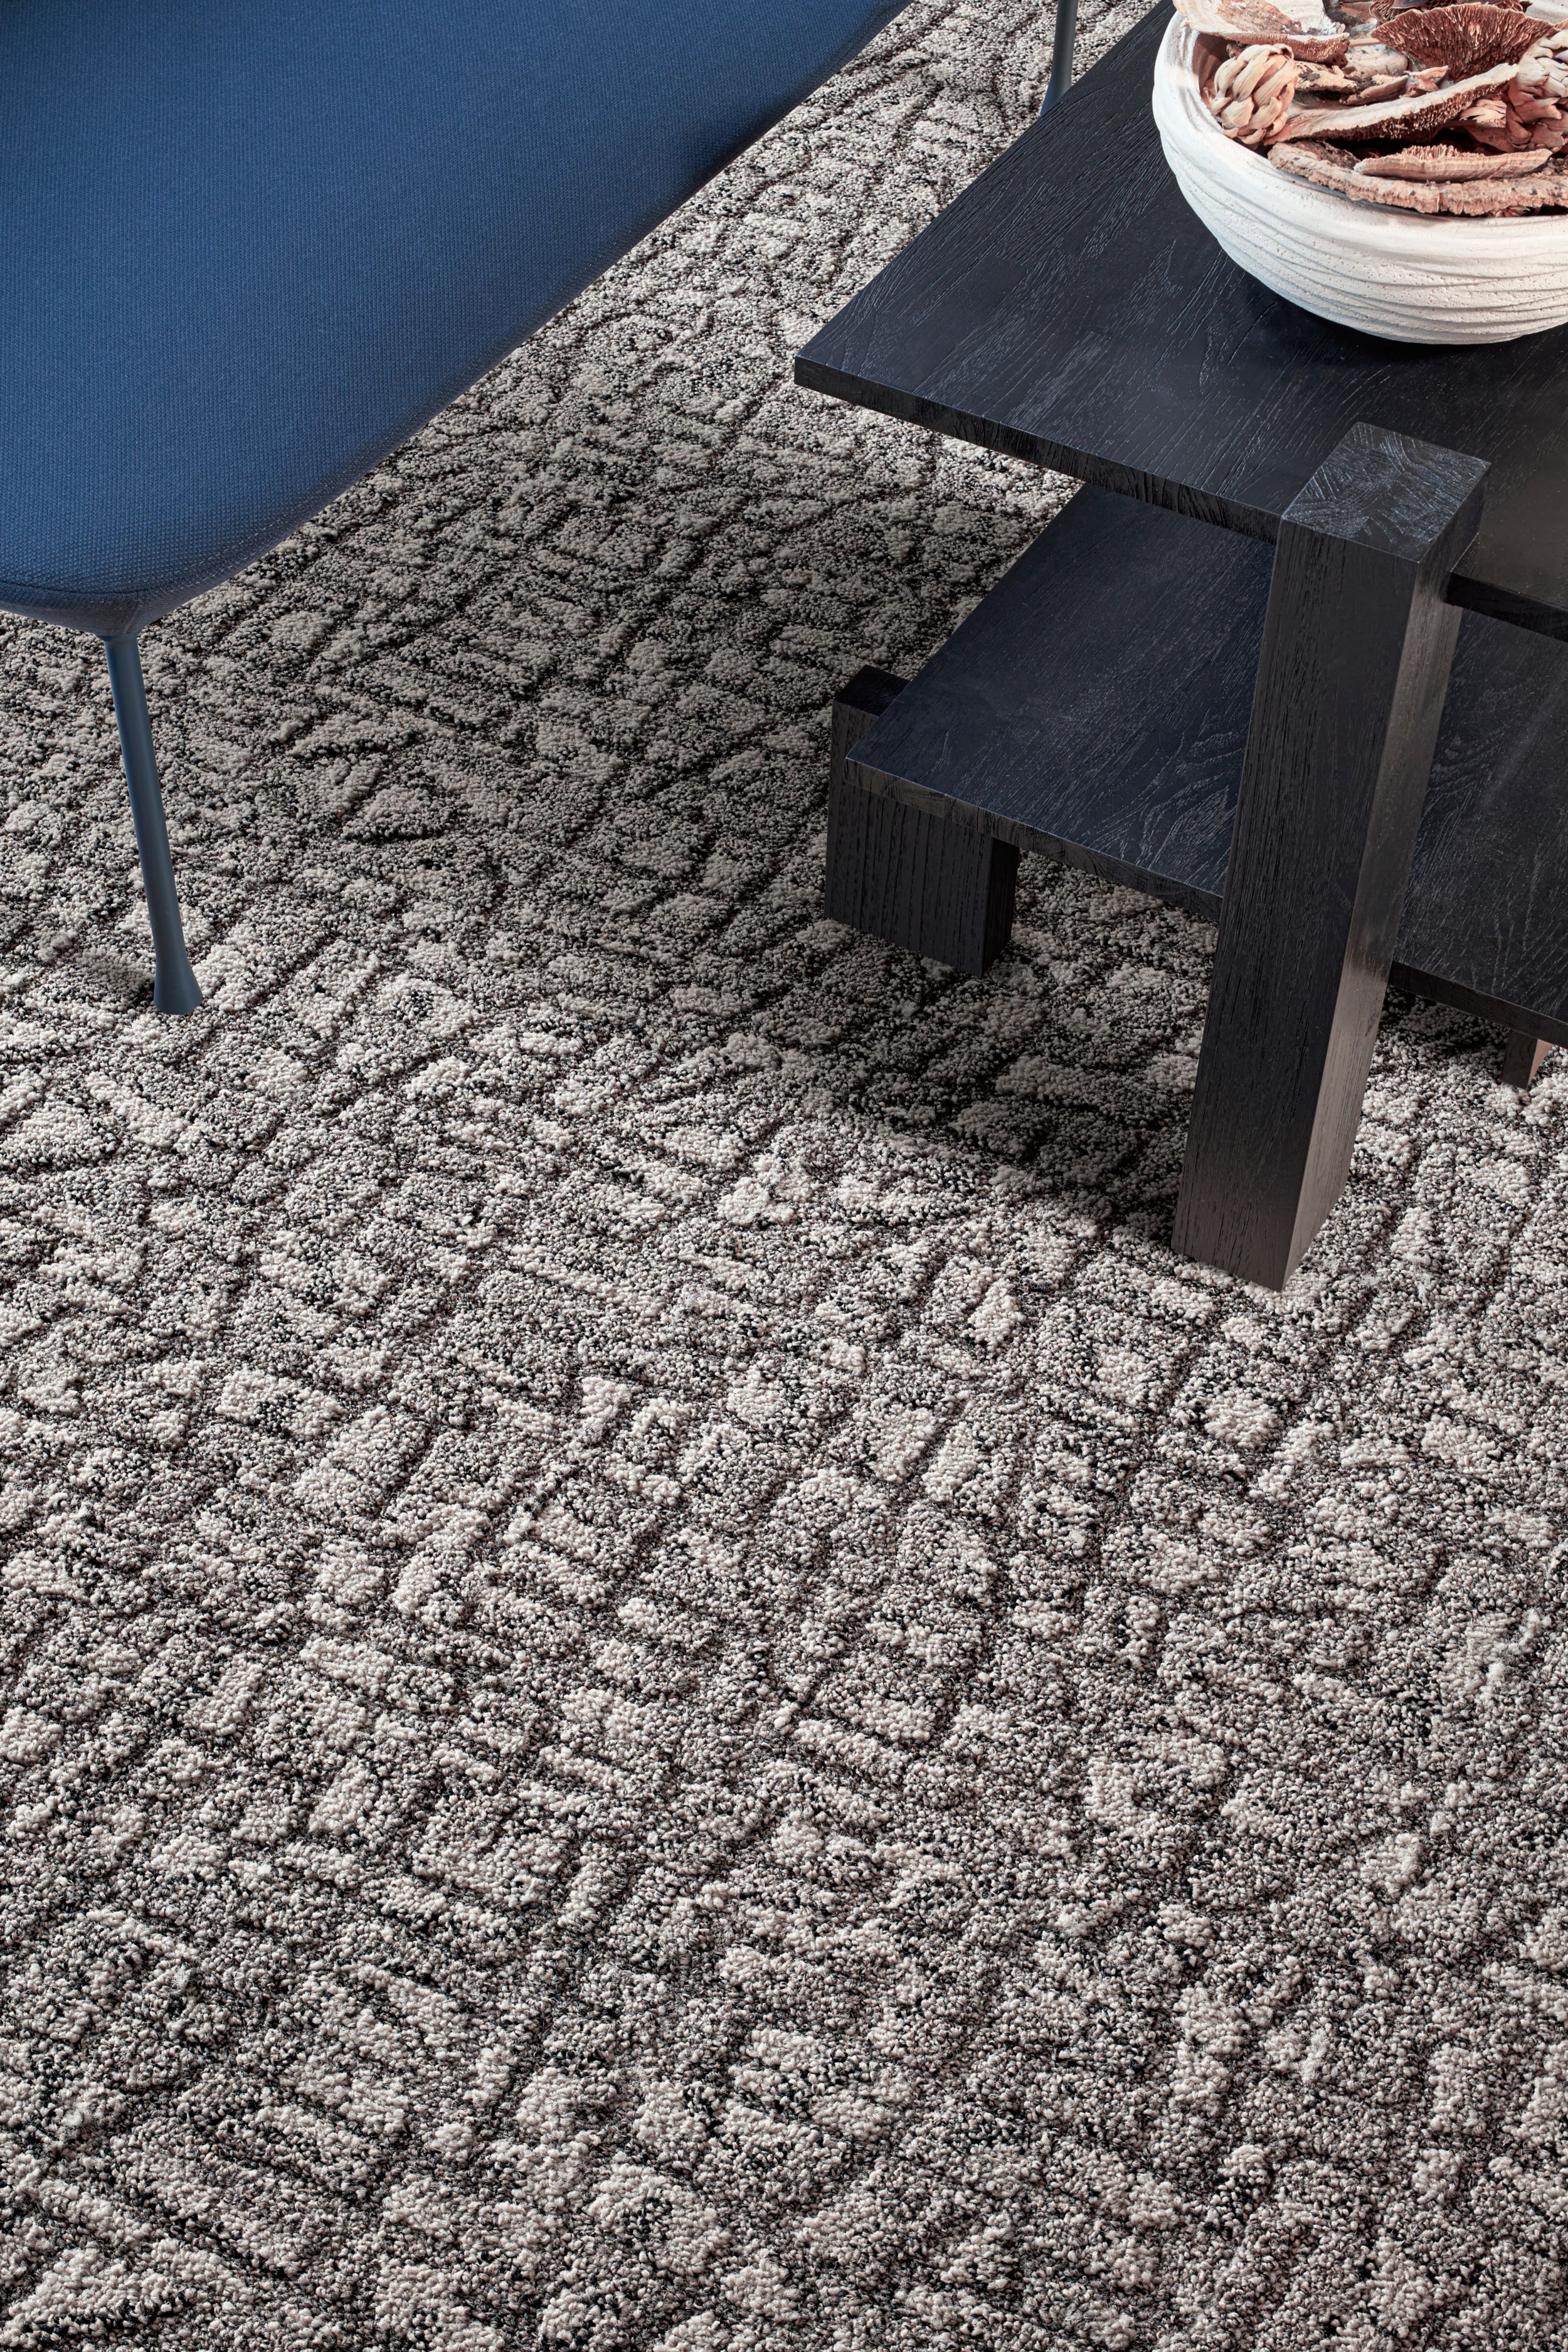 Interface E610 carpet tile in lobby with blue bench and dark wood table numéro d’image 3